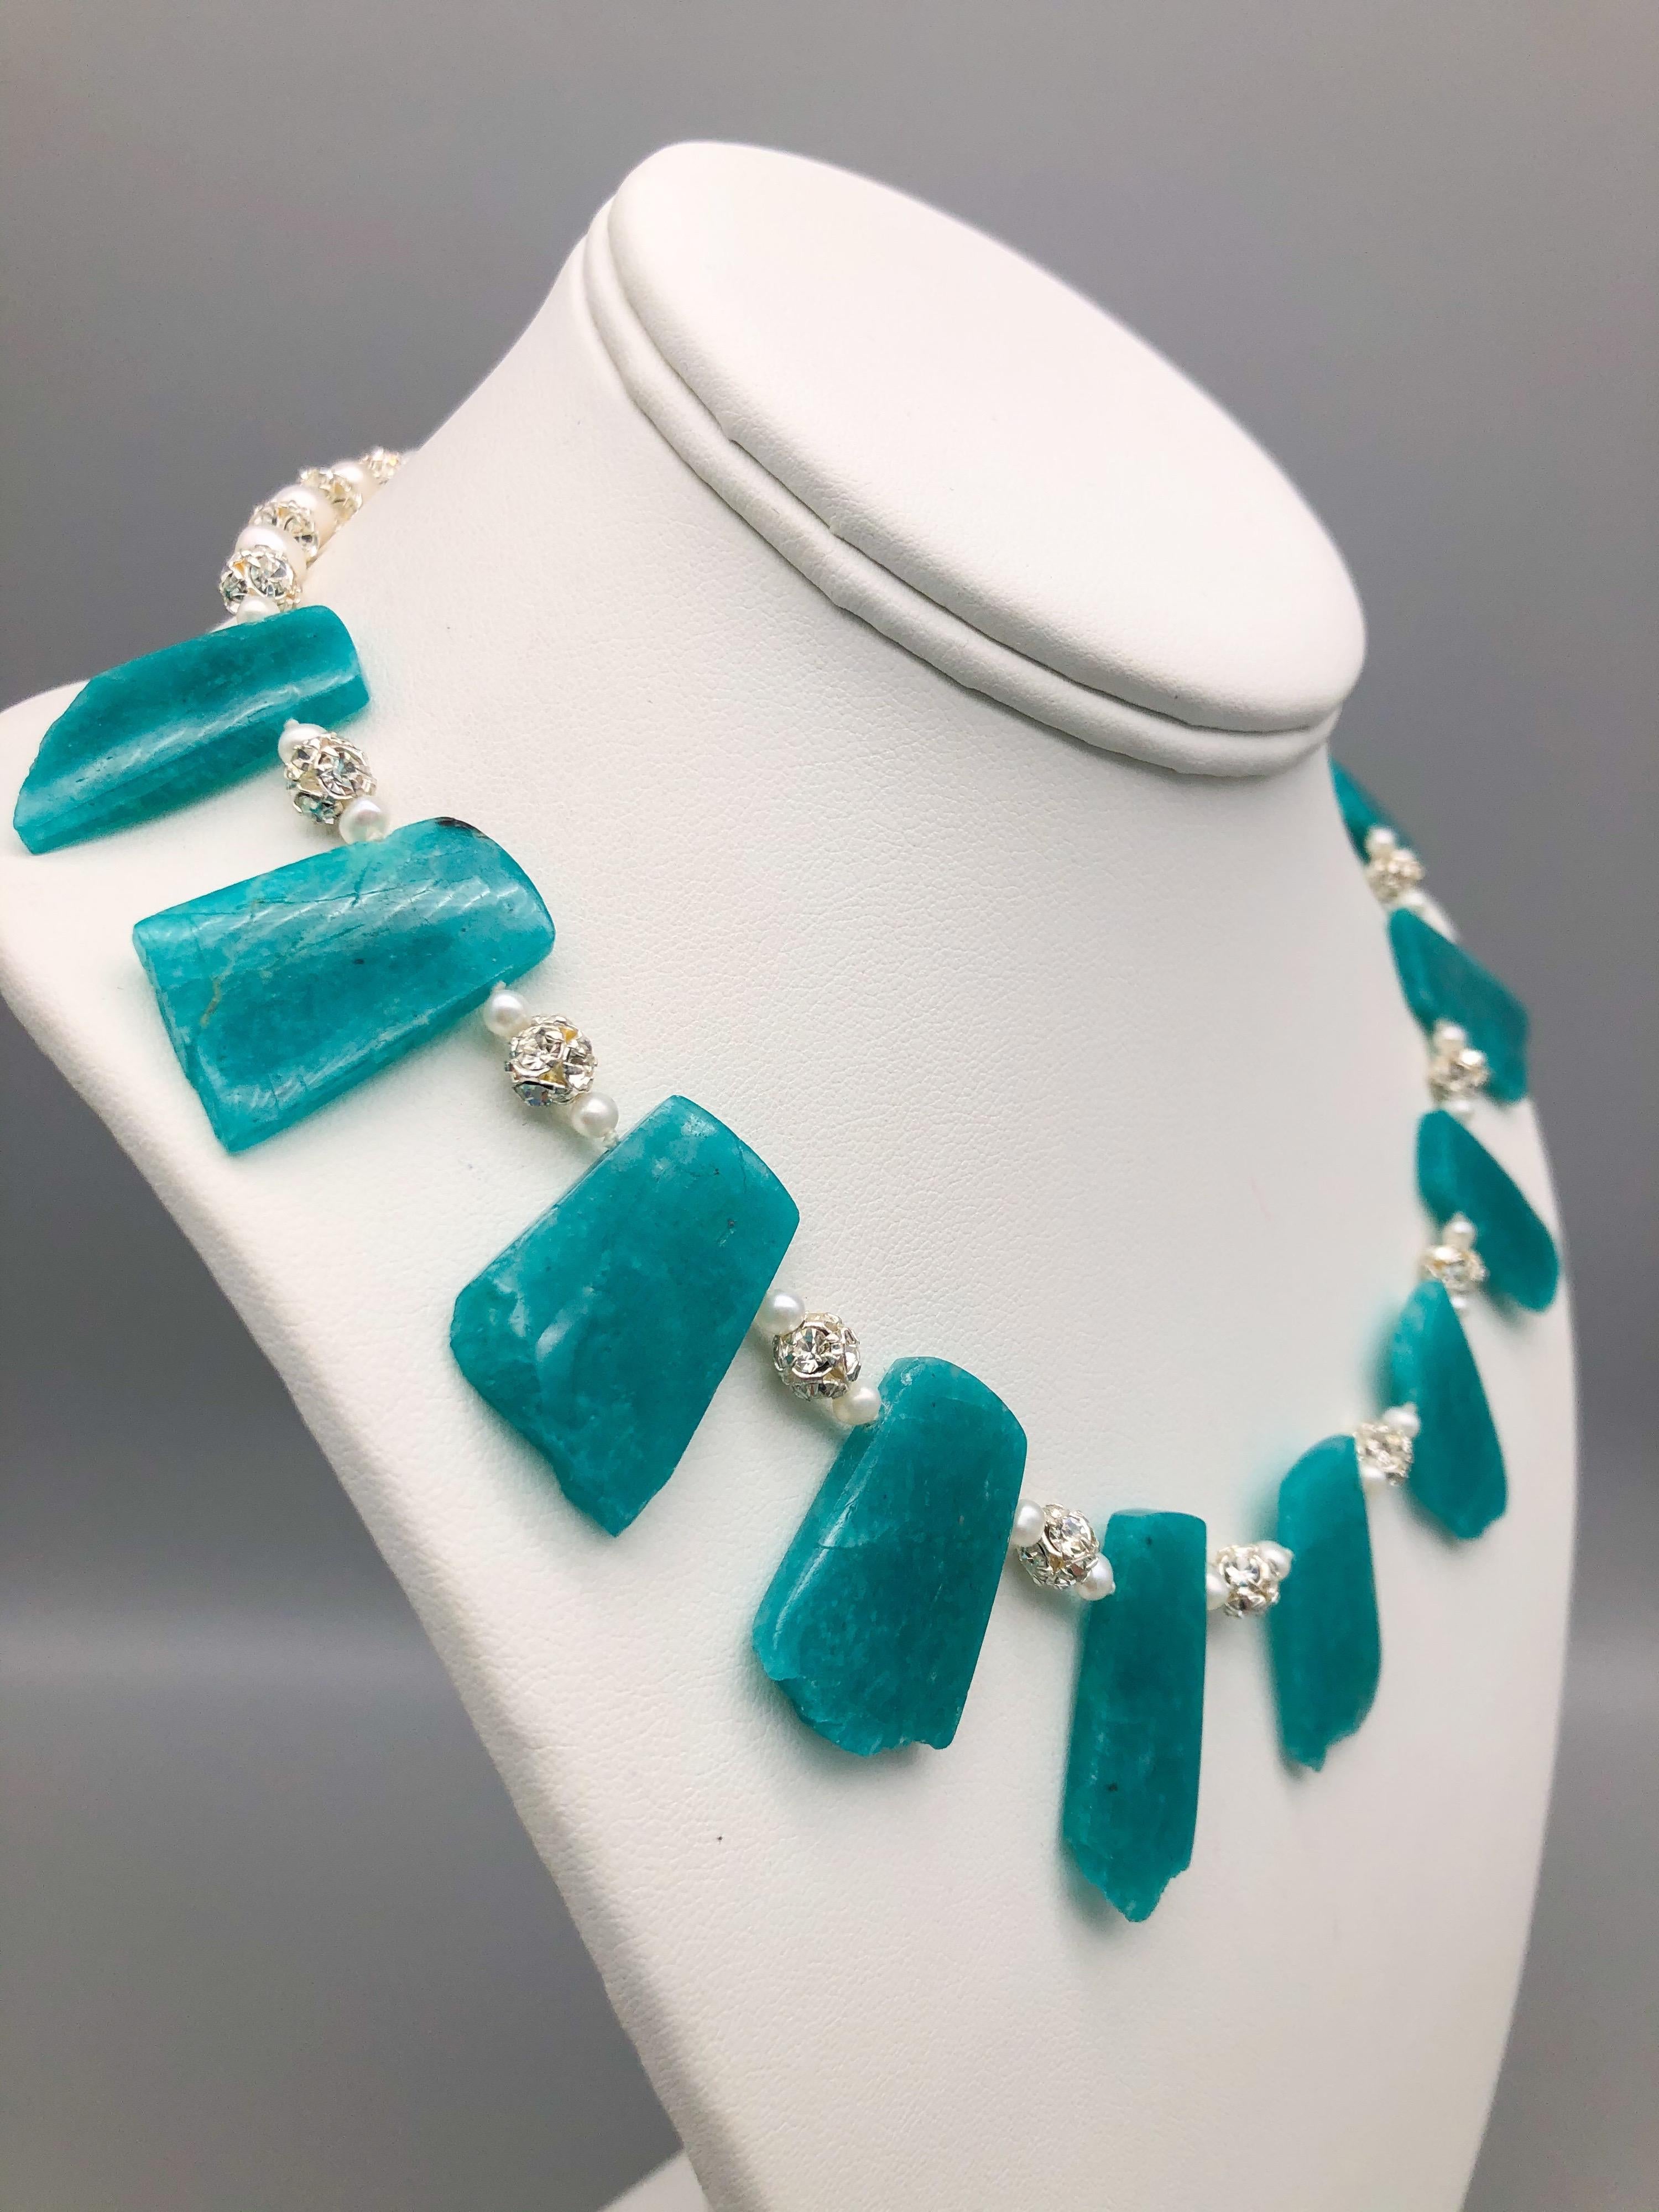 One-of-a-Kind
The polished Amazonite stones are separated by sterling silver and crystal balls that serve to enhance the rich blue-green. The stone was named for the Amazon River in the mistaken belief that the stone came from the river although it